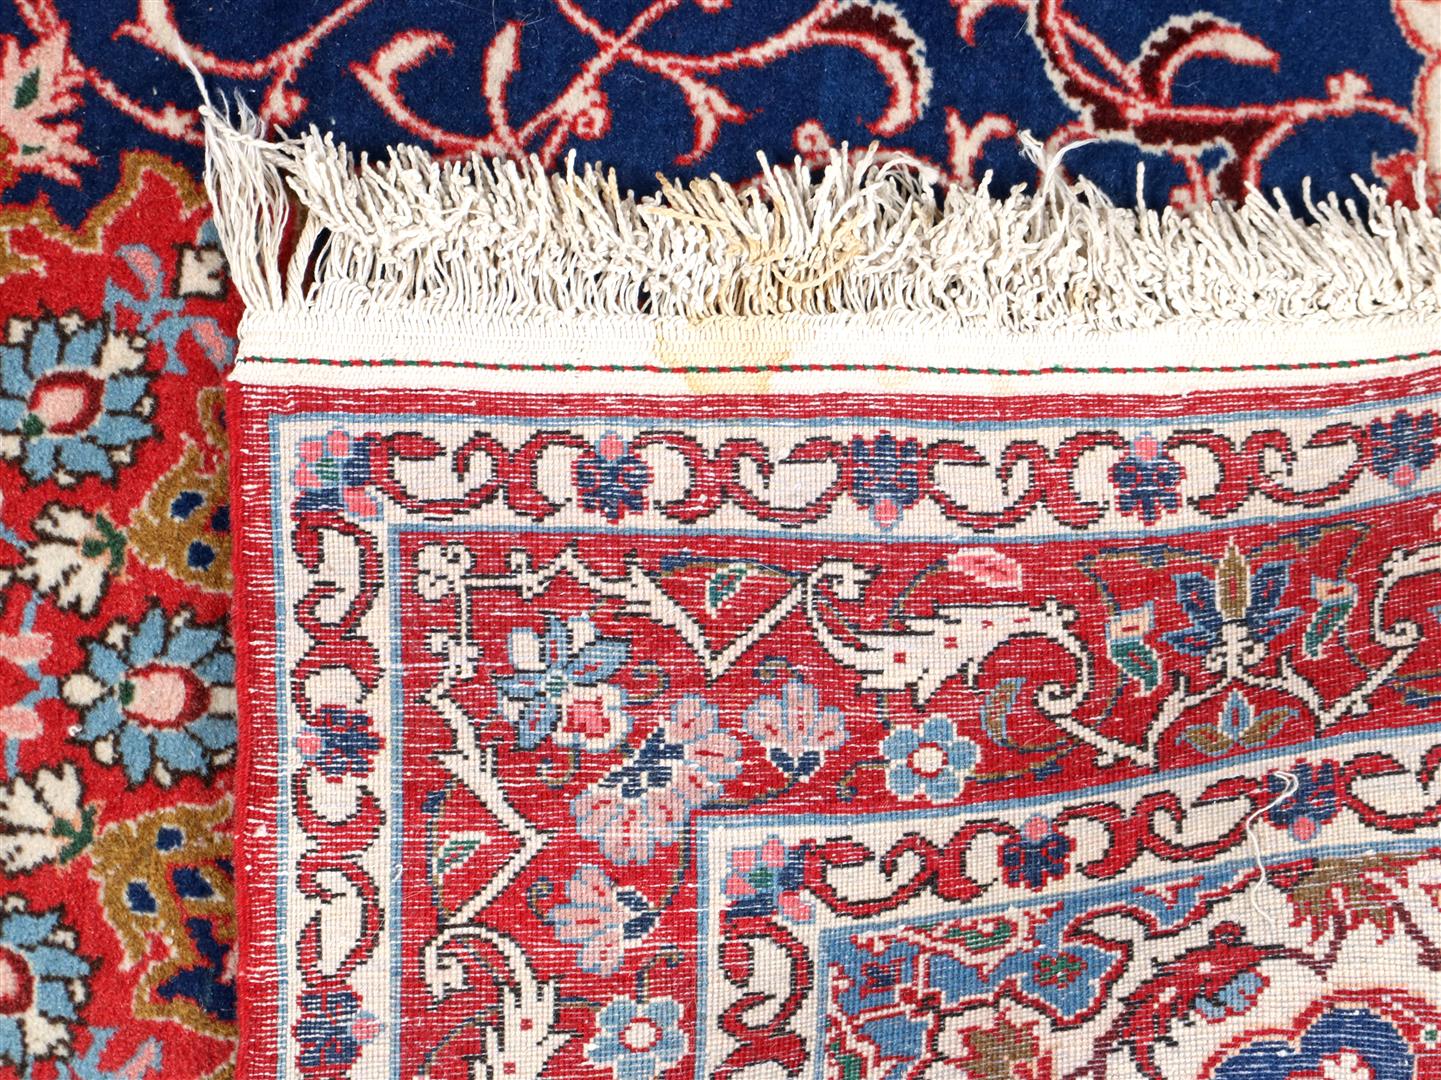 Hand-knotted oriental carpet - Image 4 of 4